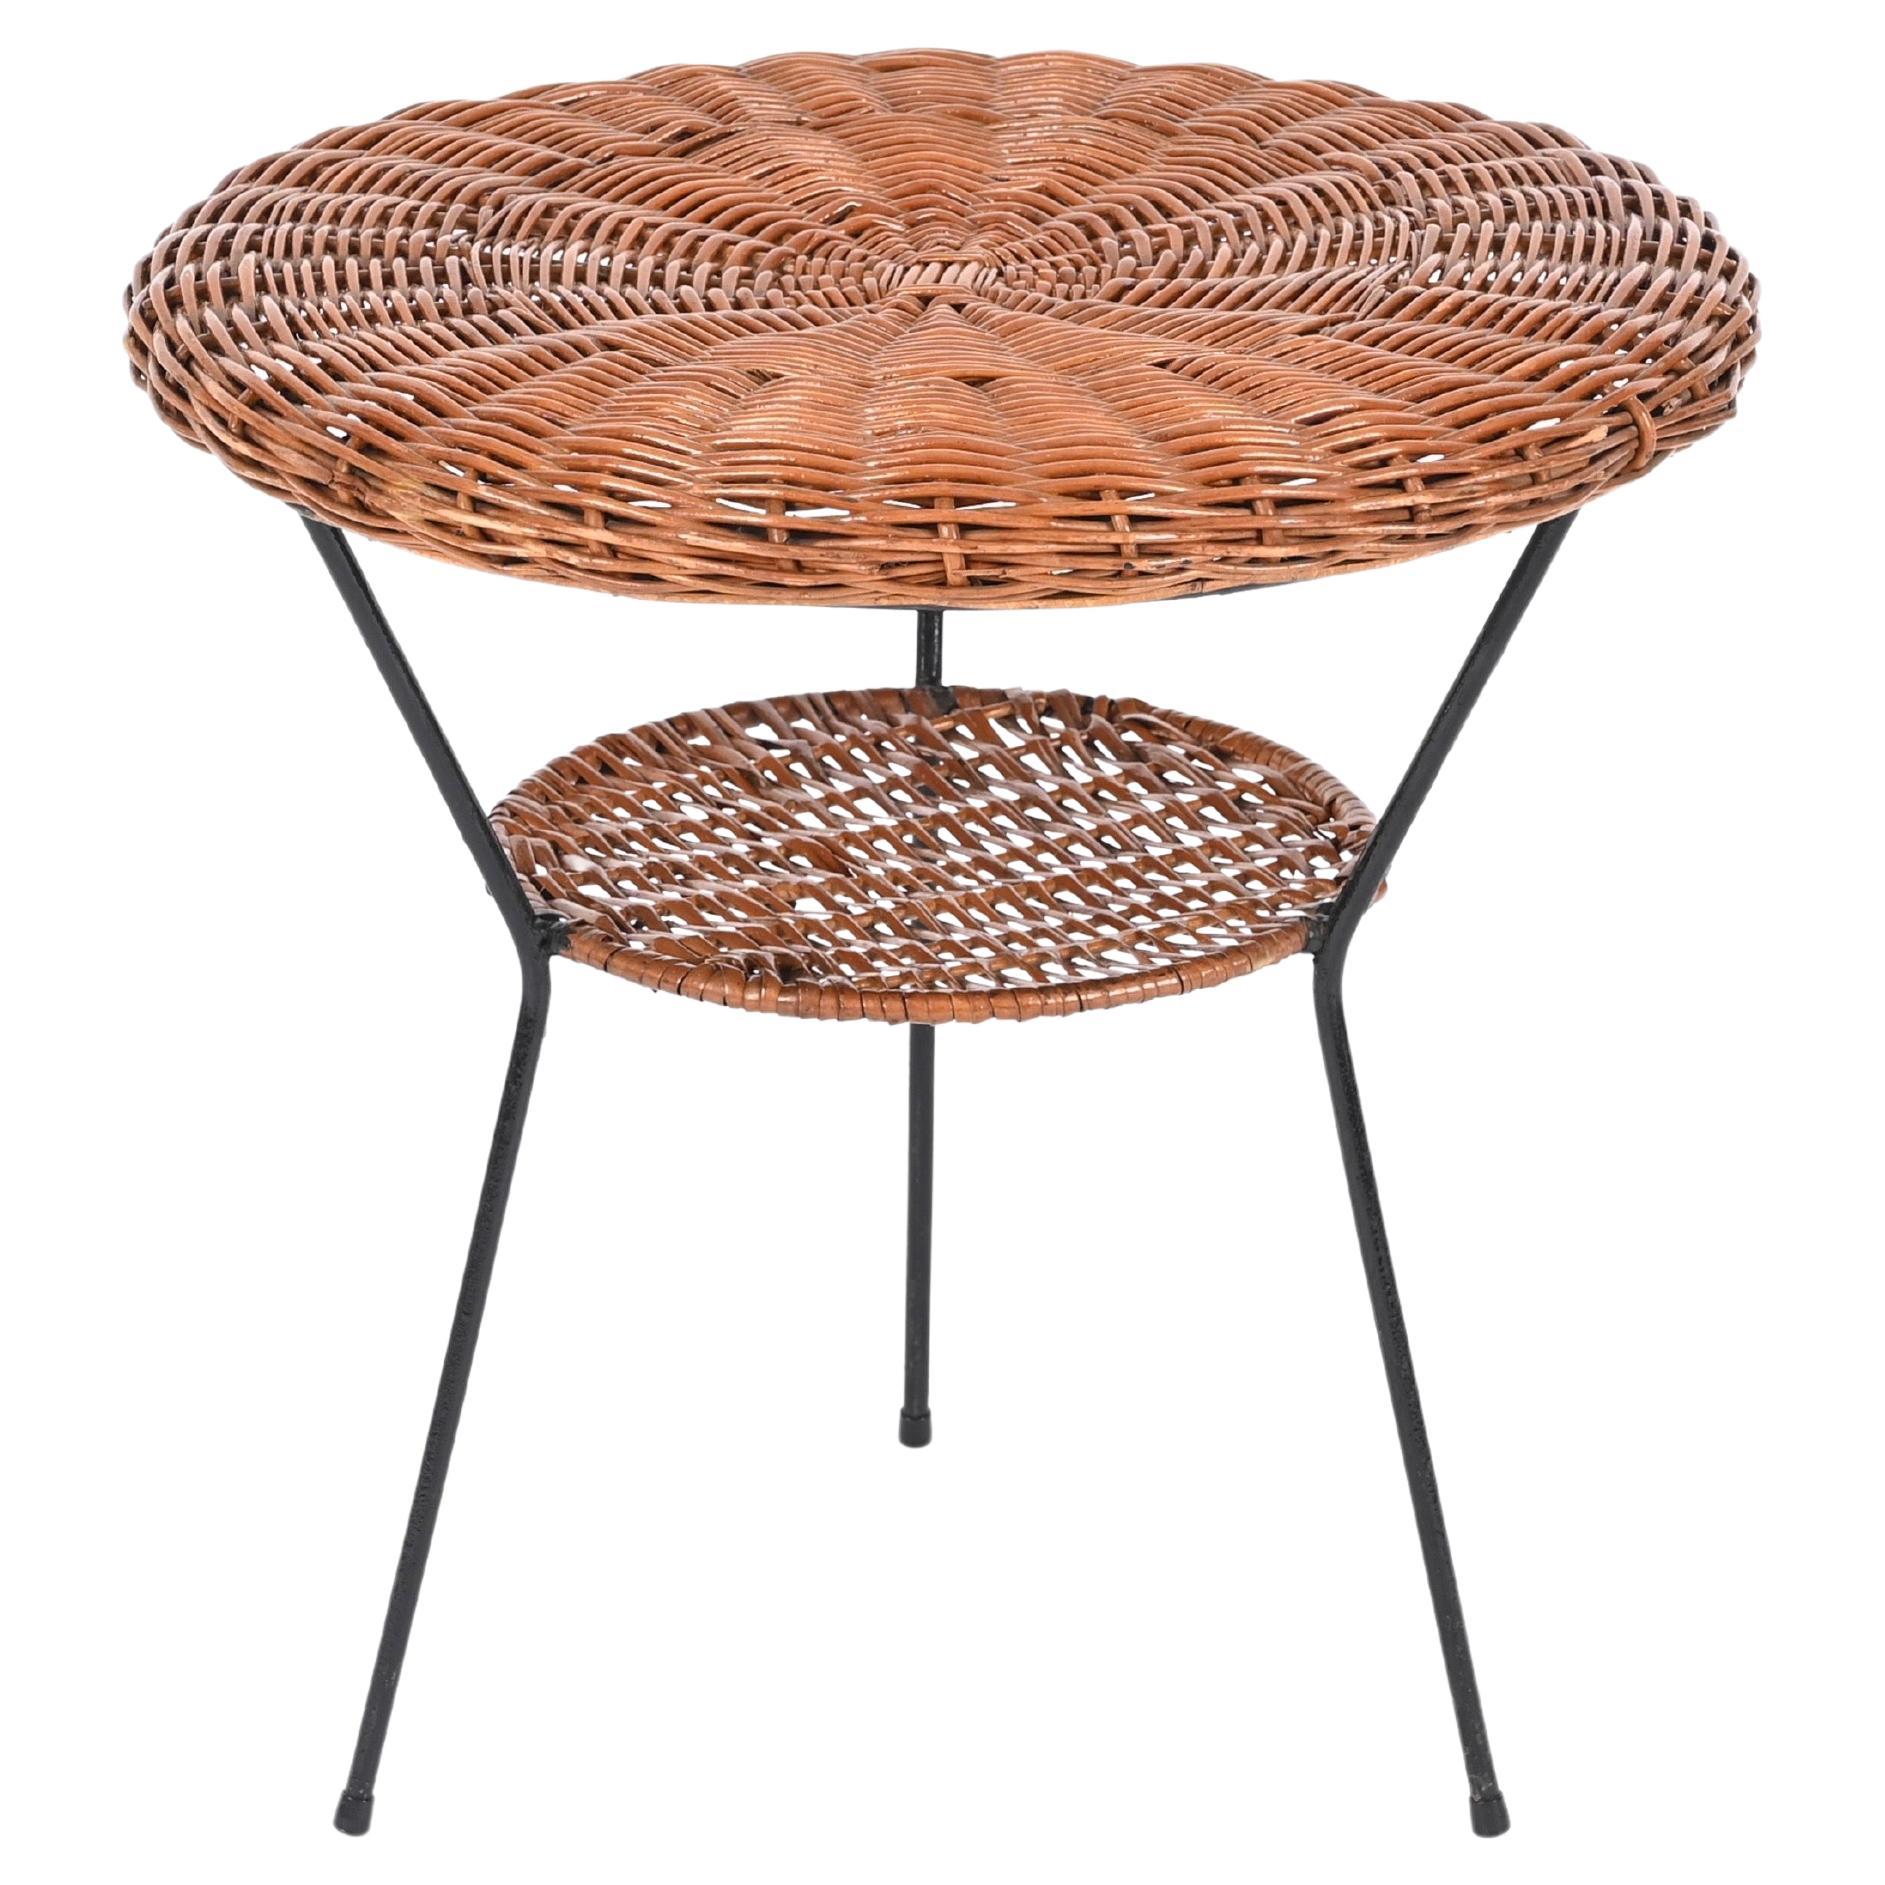 Woven Rattan, Wicker and Iron Two-Tier Round Coffee Table, Matégot, France 1960s For Sale